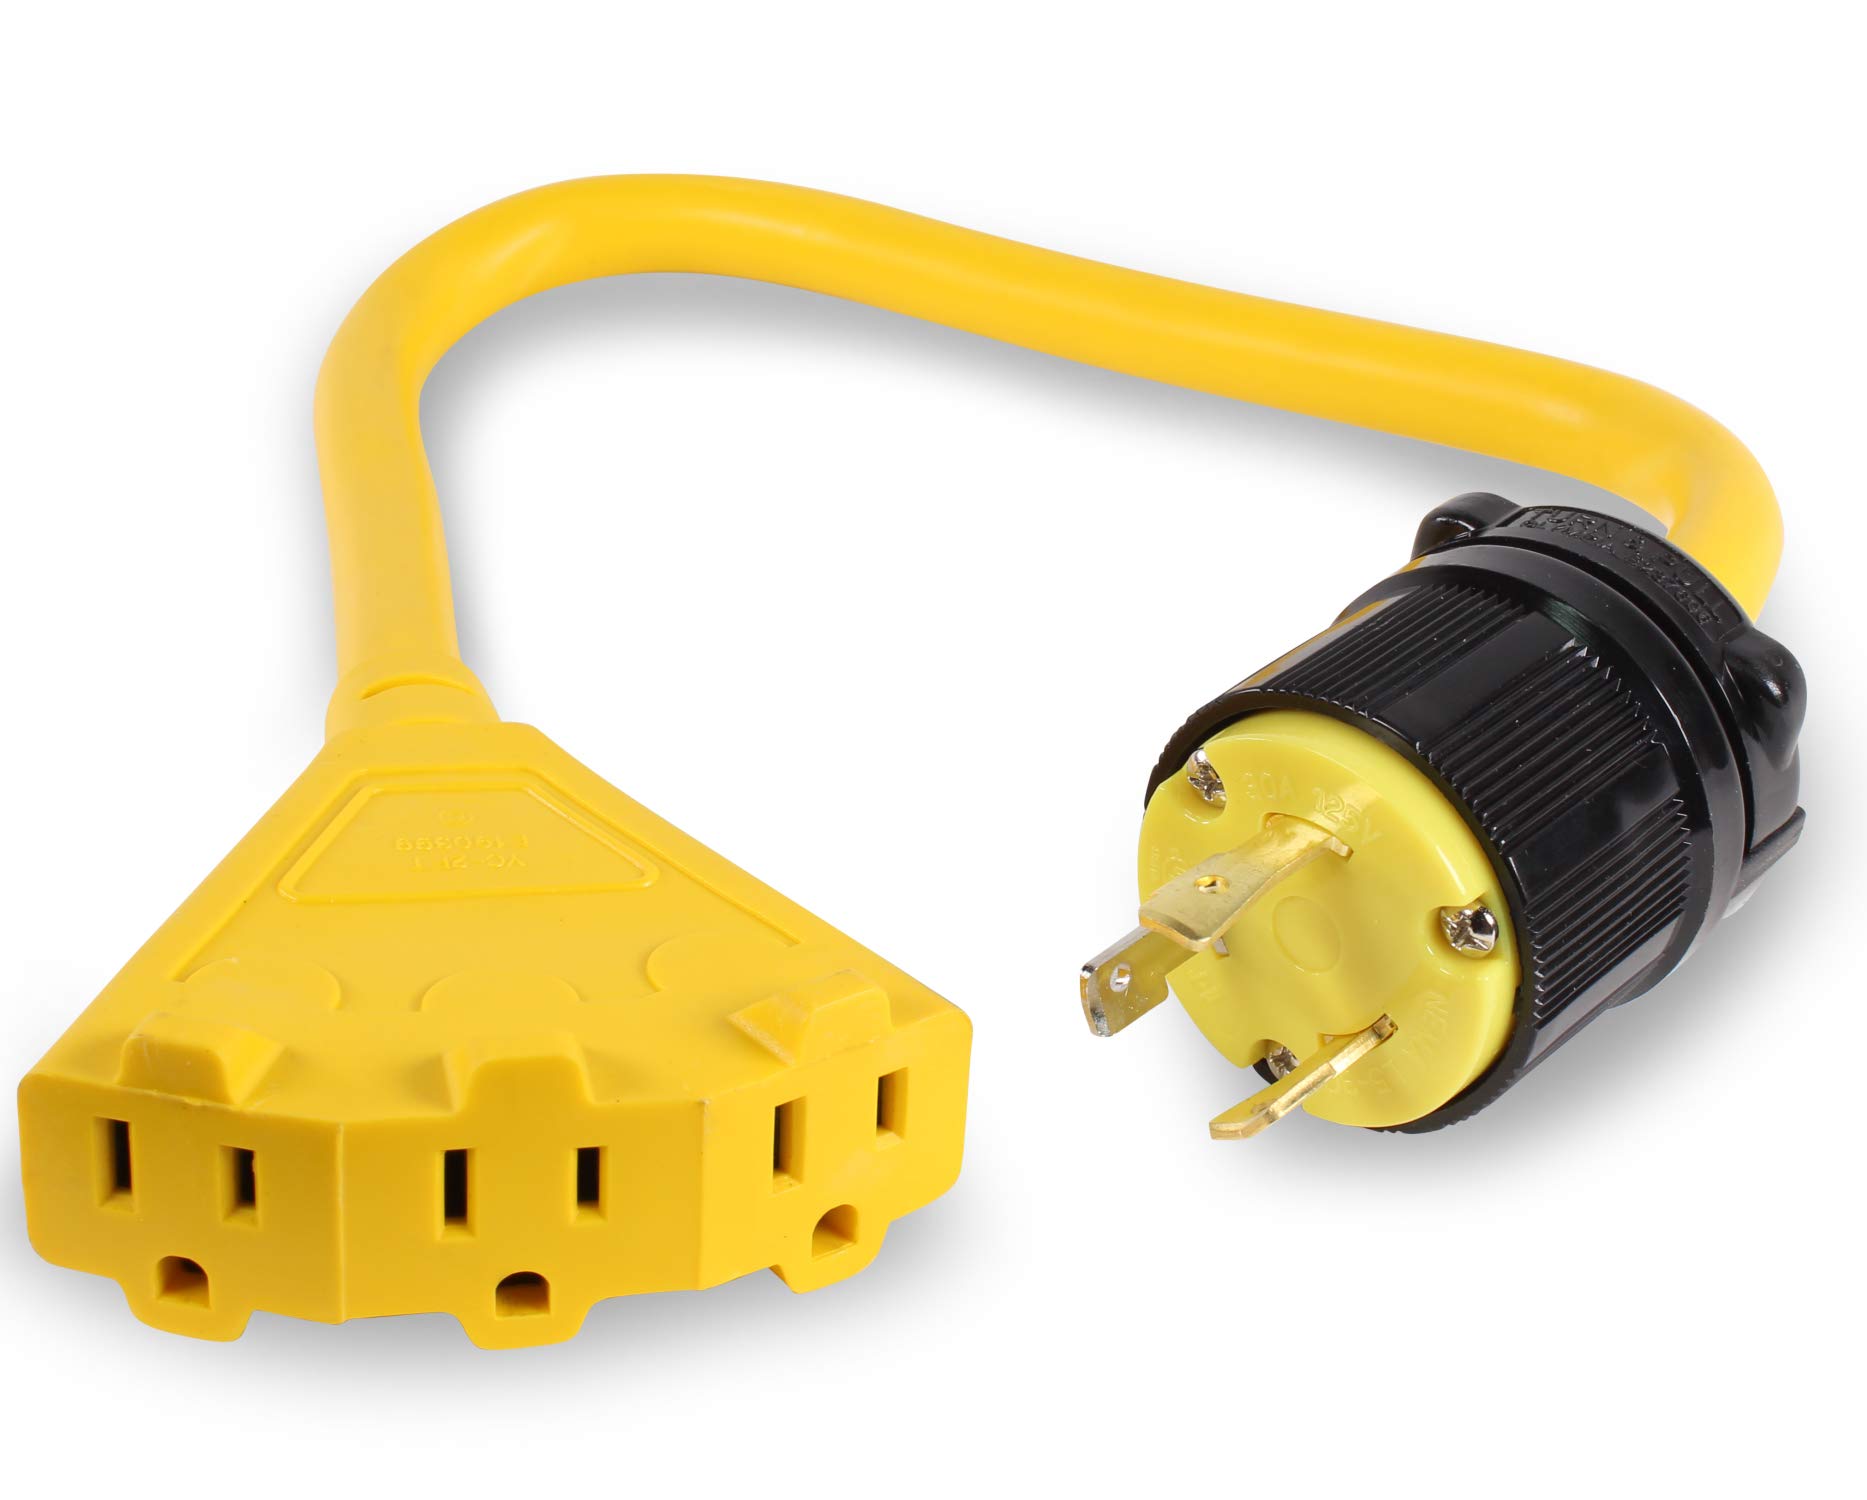 L5-30 to Triple 5-15R Generator Power Cord Adapter, by Journeyman Pro | 30A to 15A/110V 3-Way Splitter | 3-Prong Distribution Cords (2'FT L530P to Triple 5-15R)